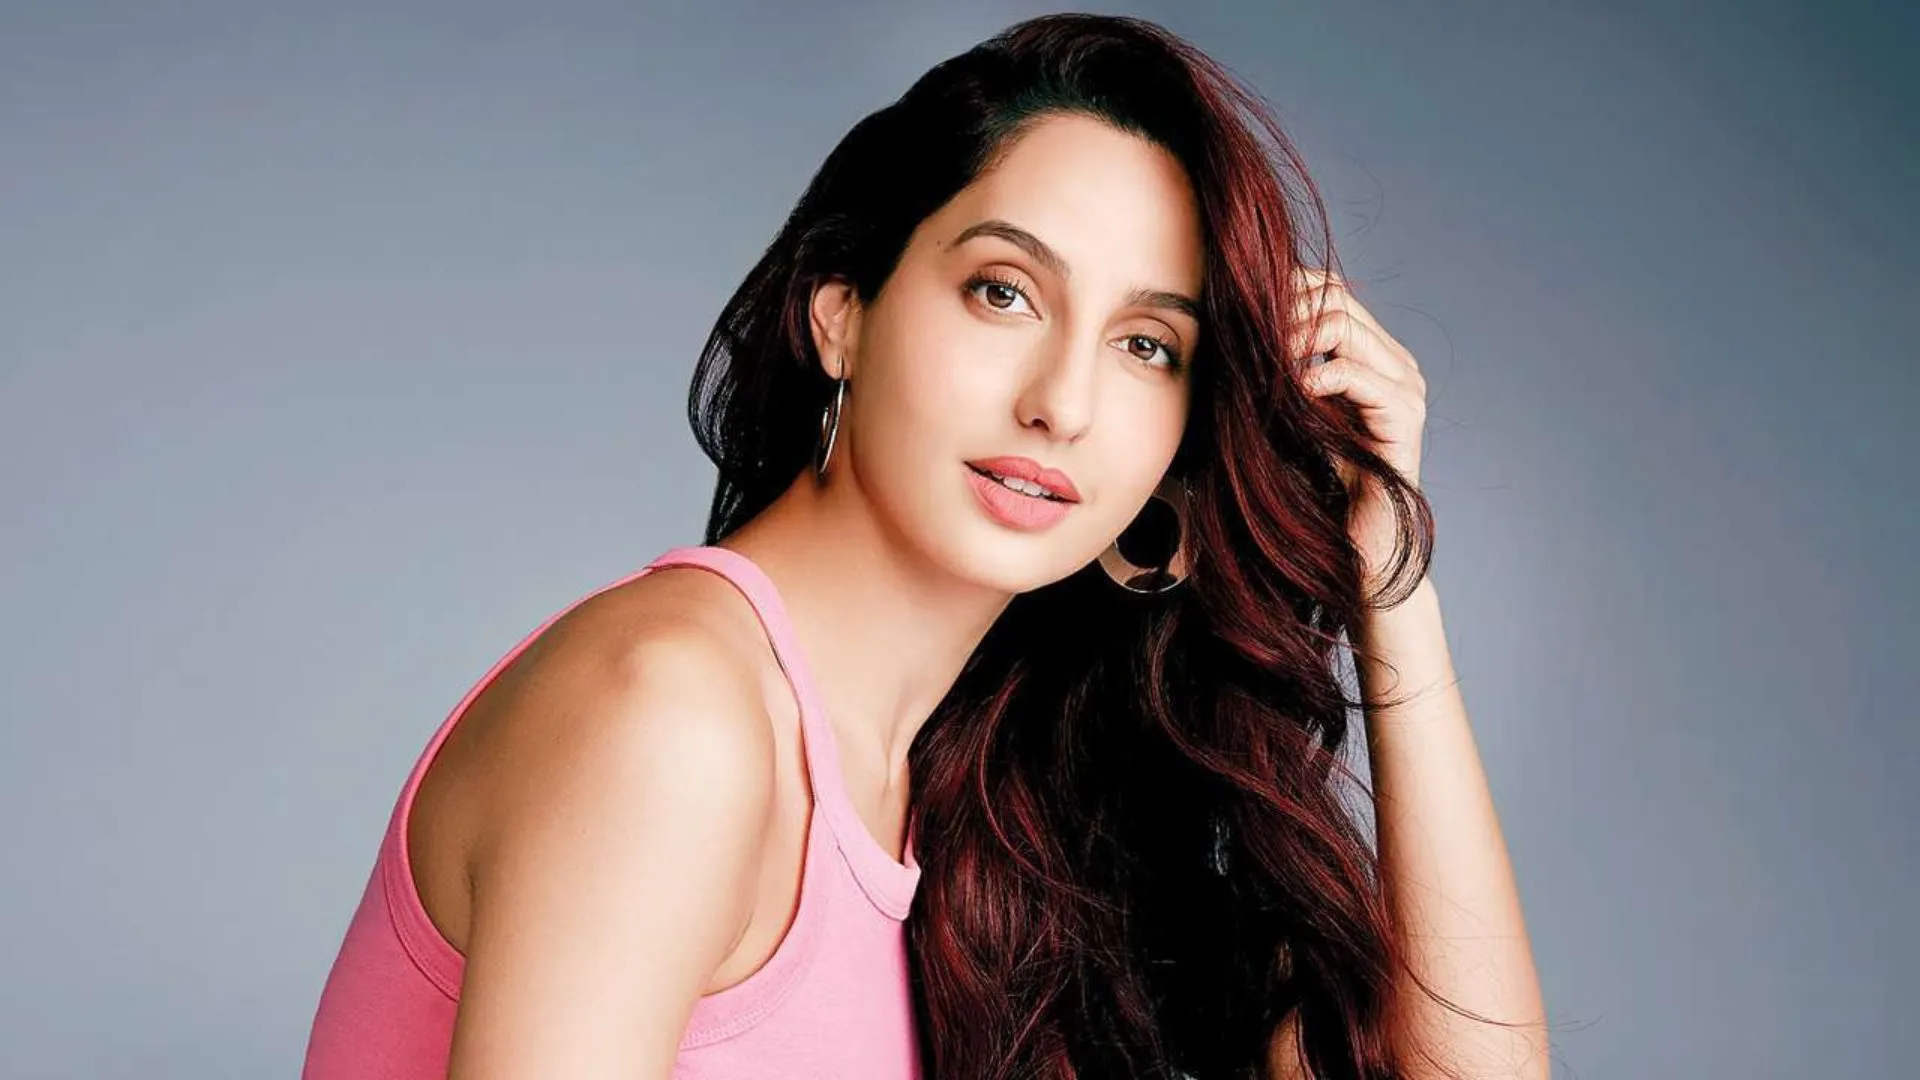 The Early Life of Nora Fatehi